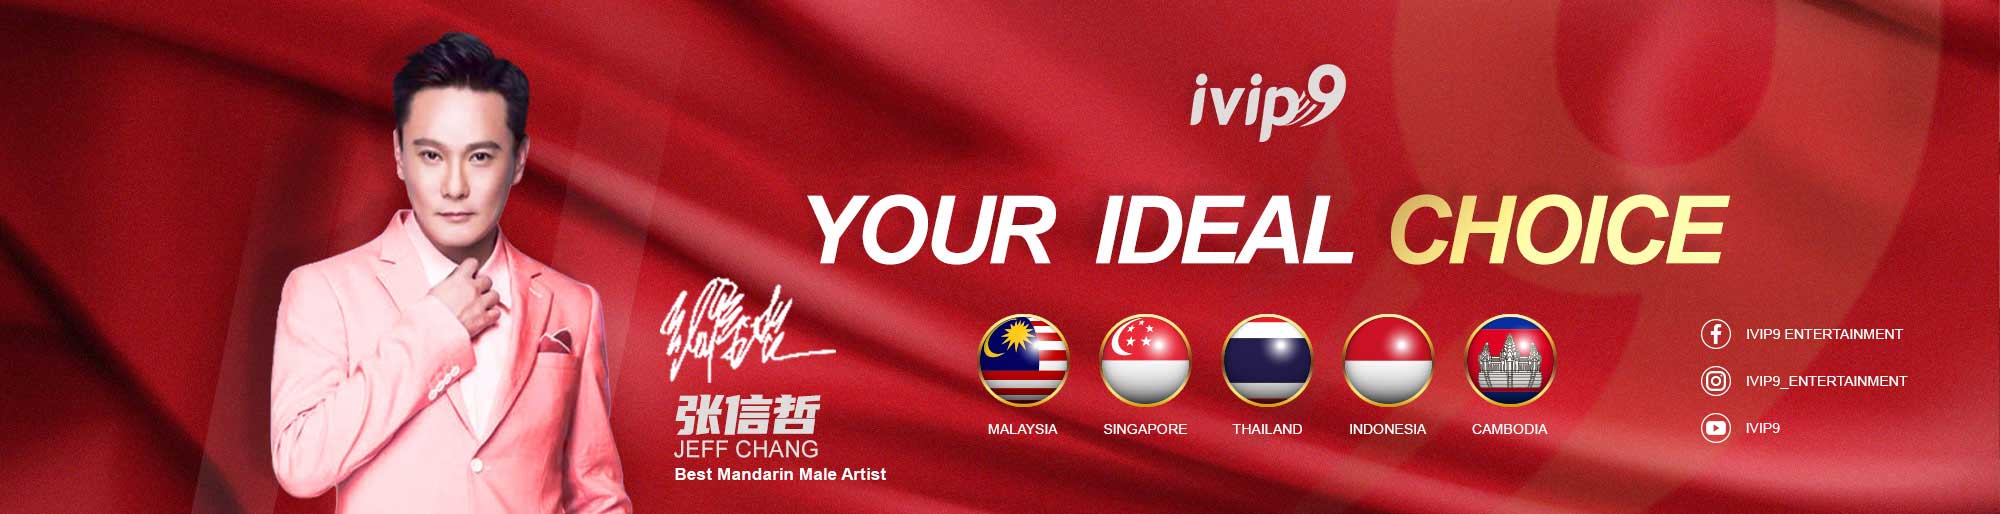 IVIP9 Your Ideal Choice banner